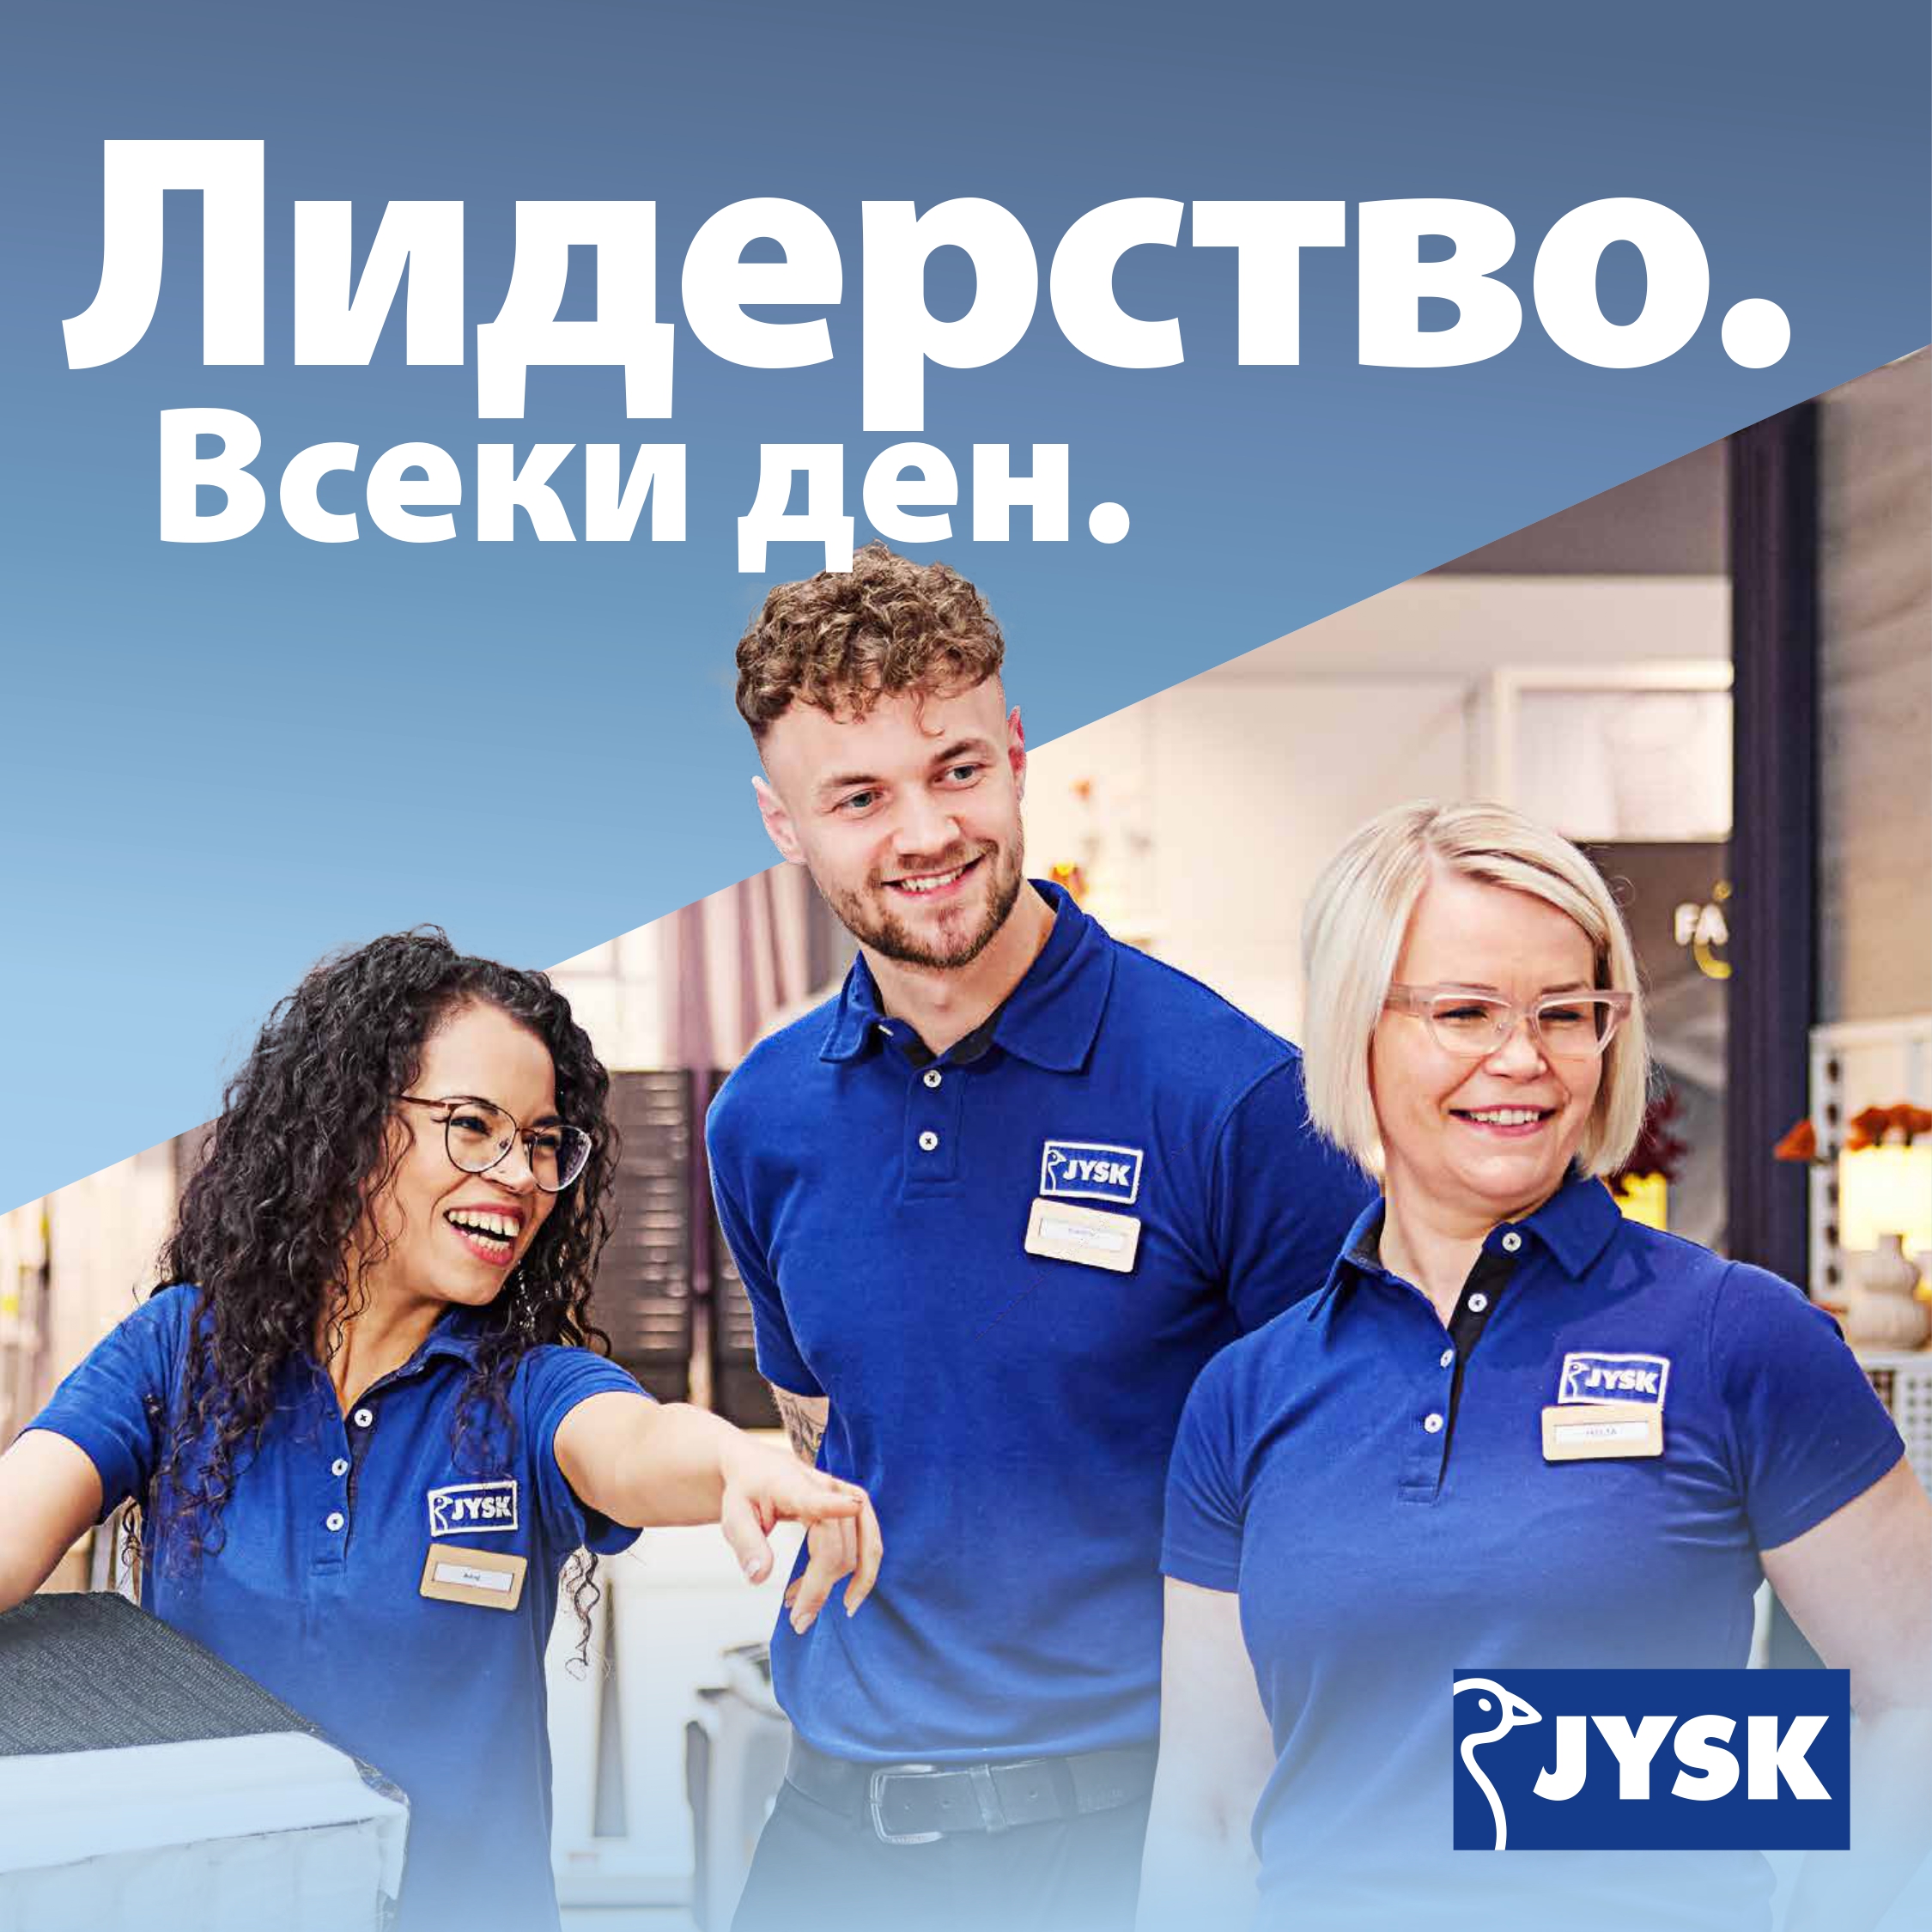 JBG - Store Manager